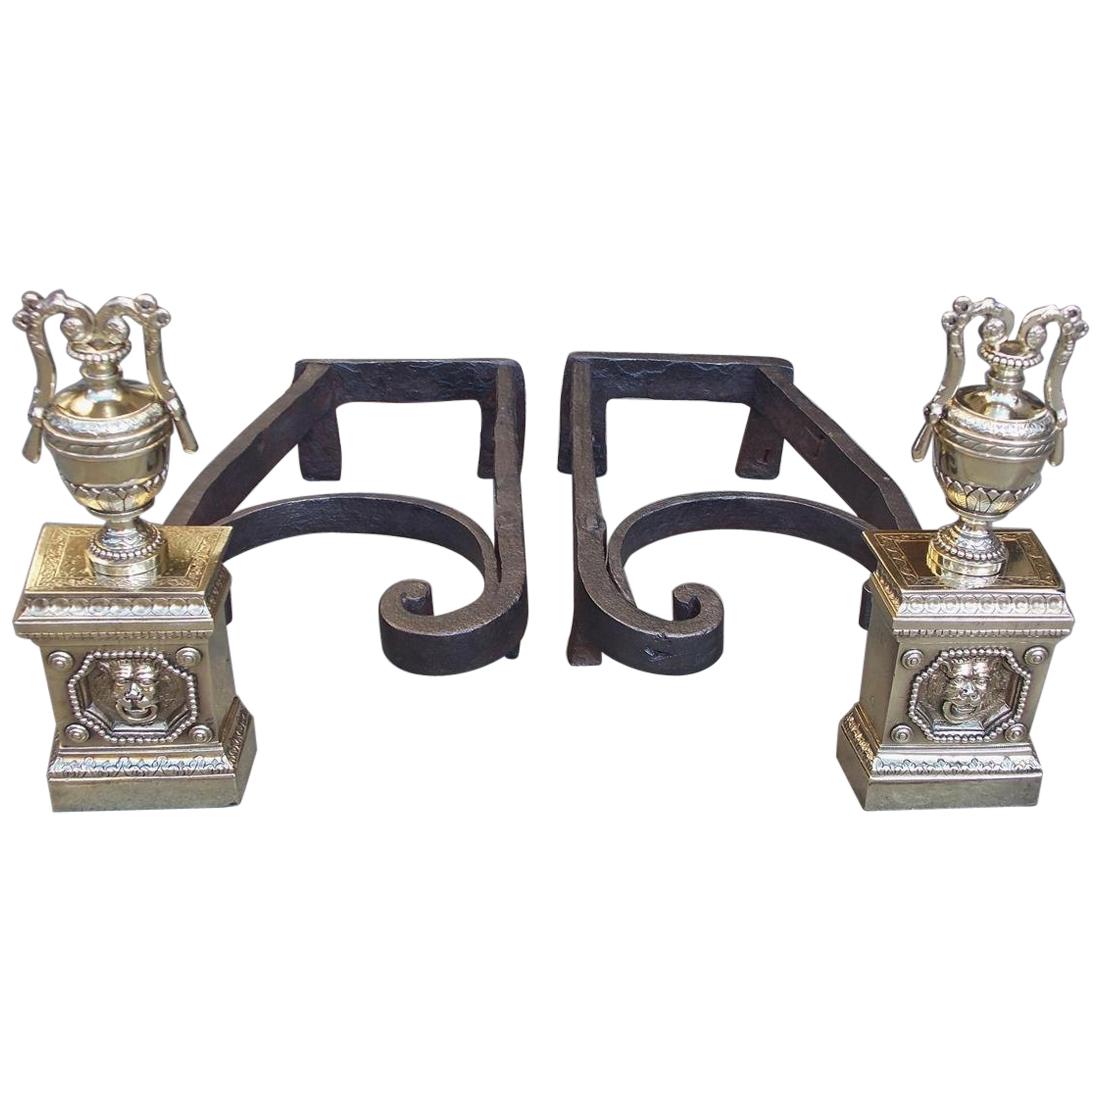 Pair of French Brass and Wrought Iron Lion and Foliage Urn Andirons, Circa 1790